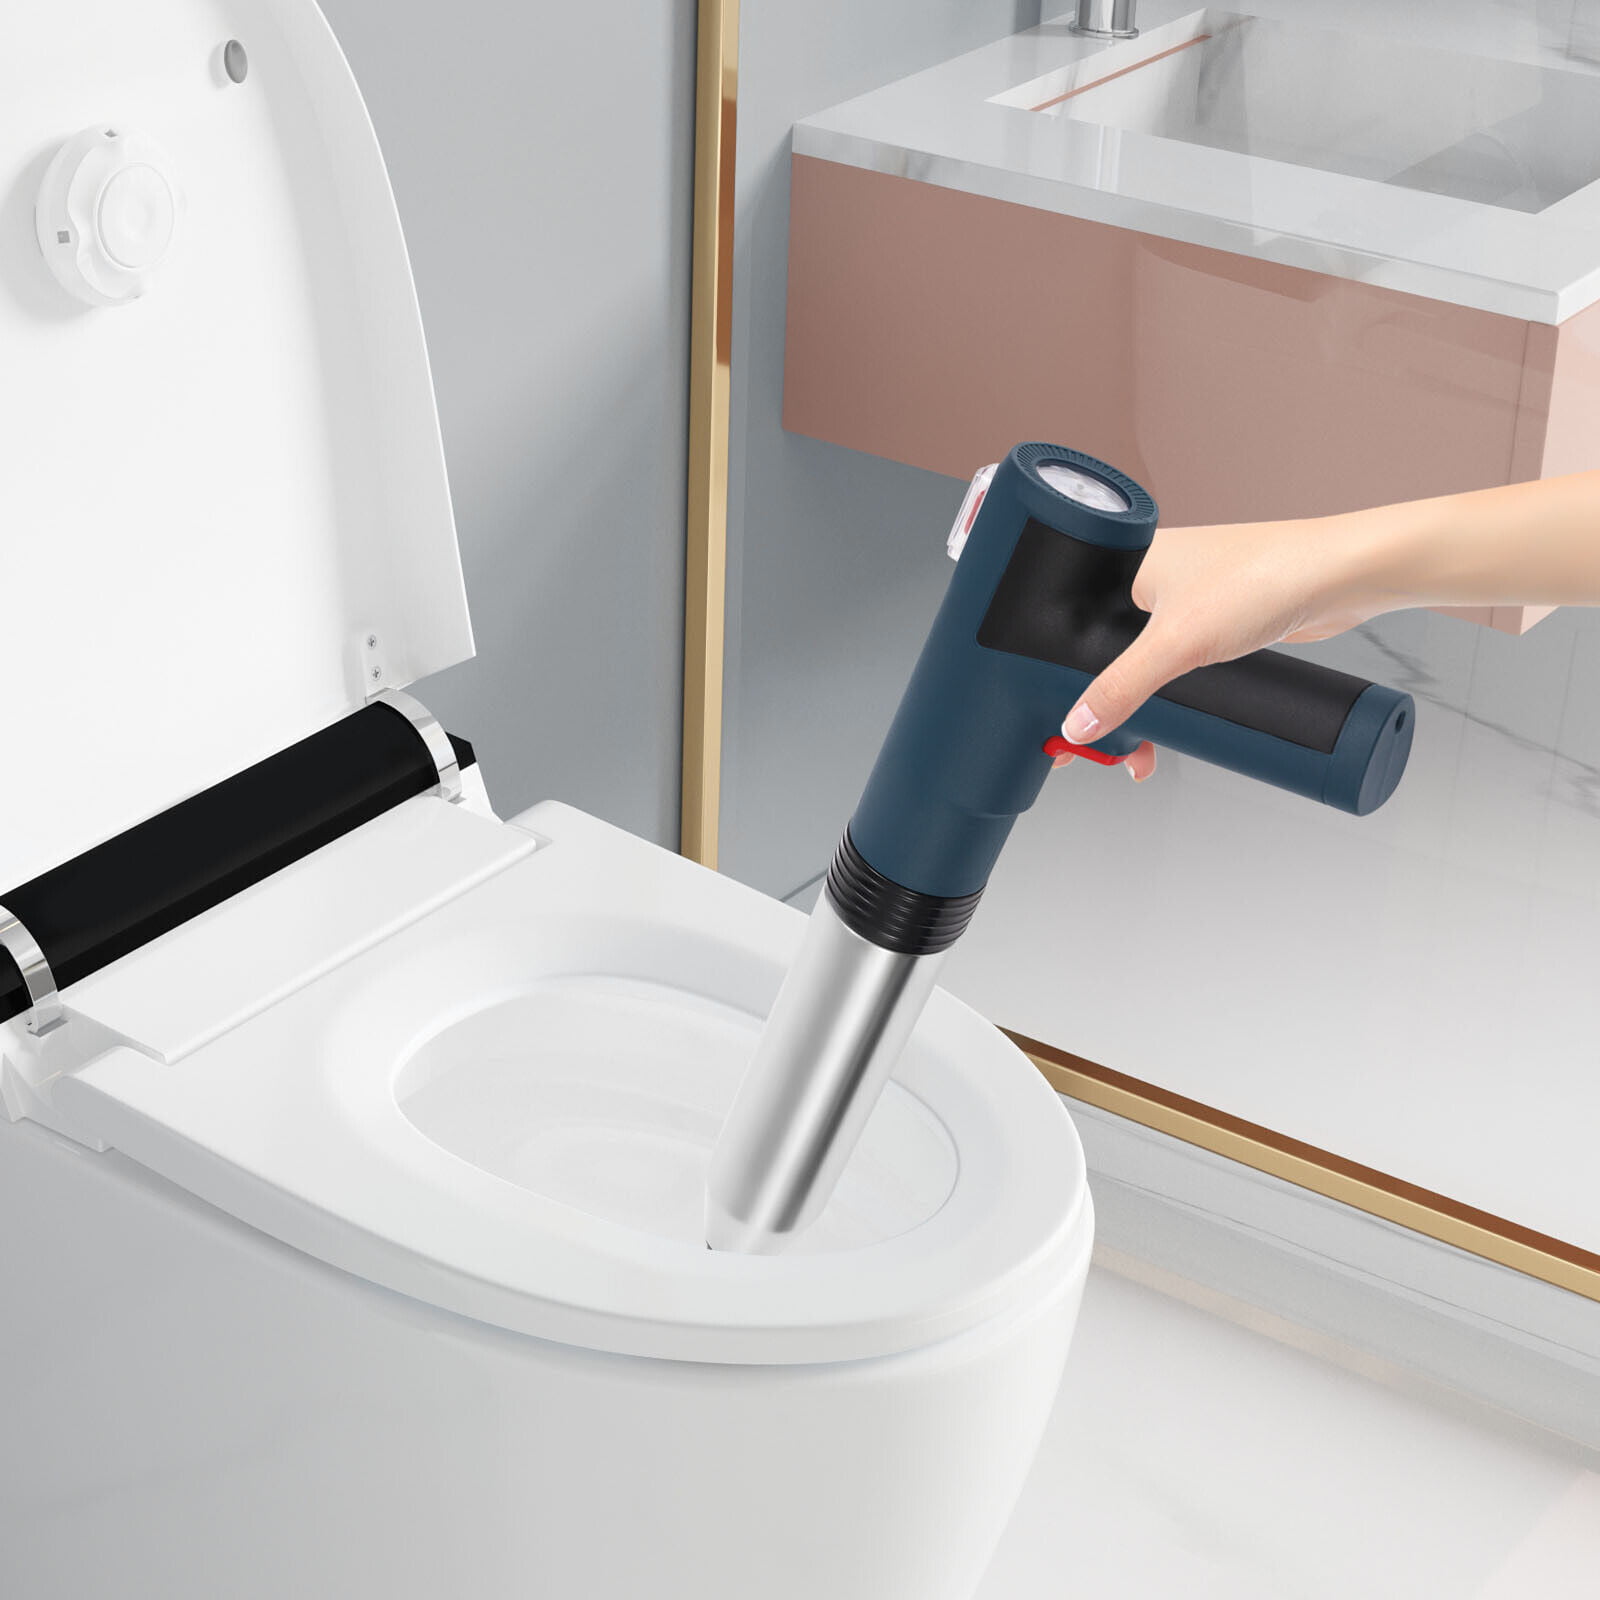 Bathroom Upkeep: How to Deal With a Toilet Clog — 911 Heating